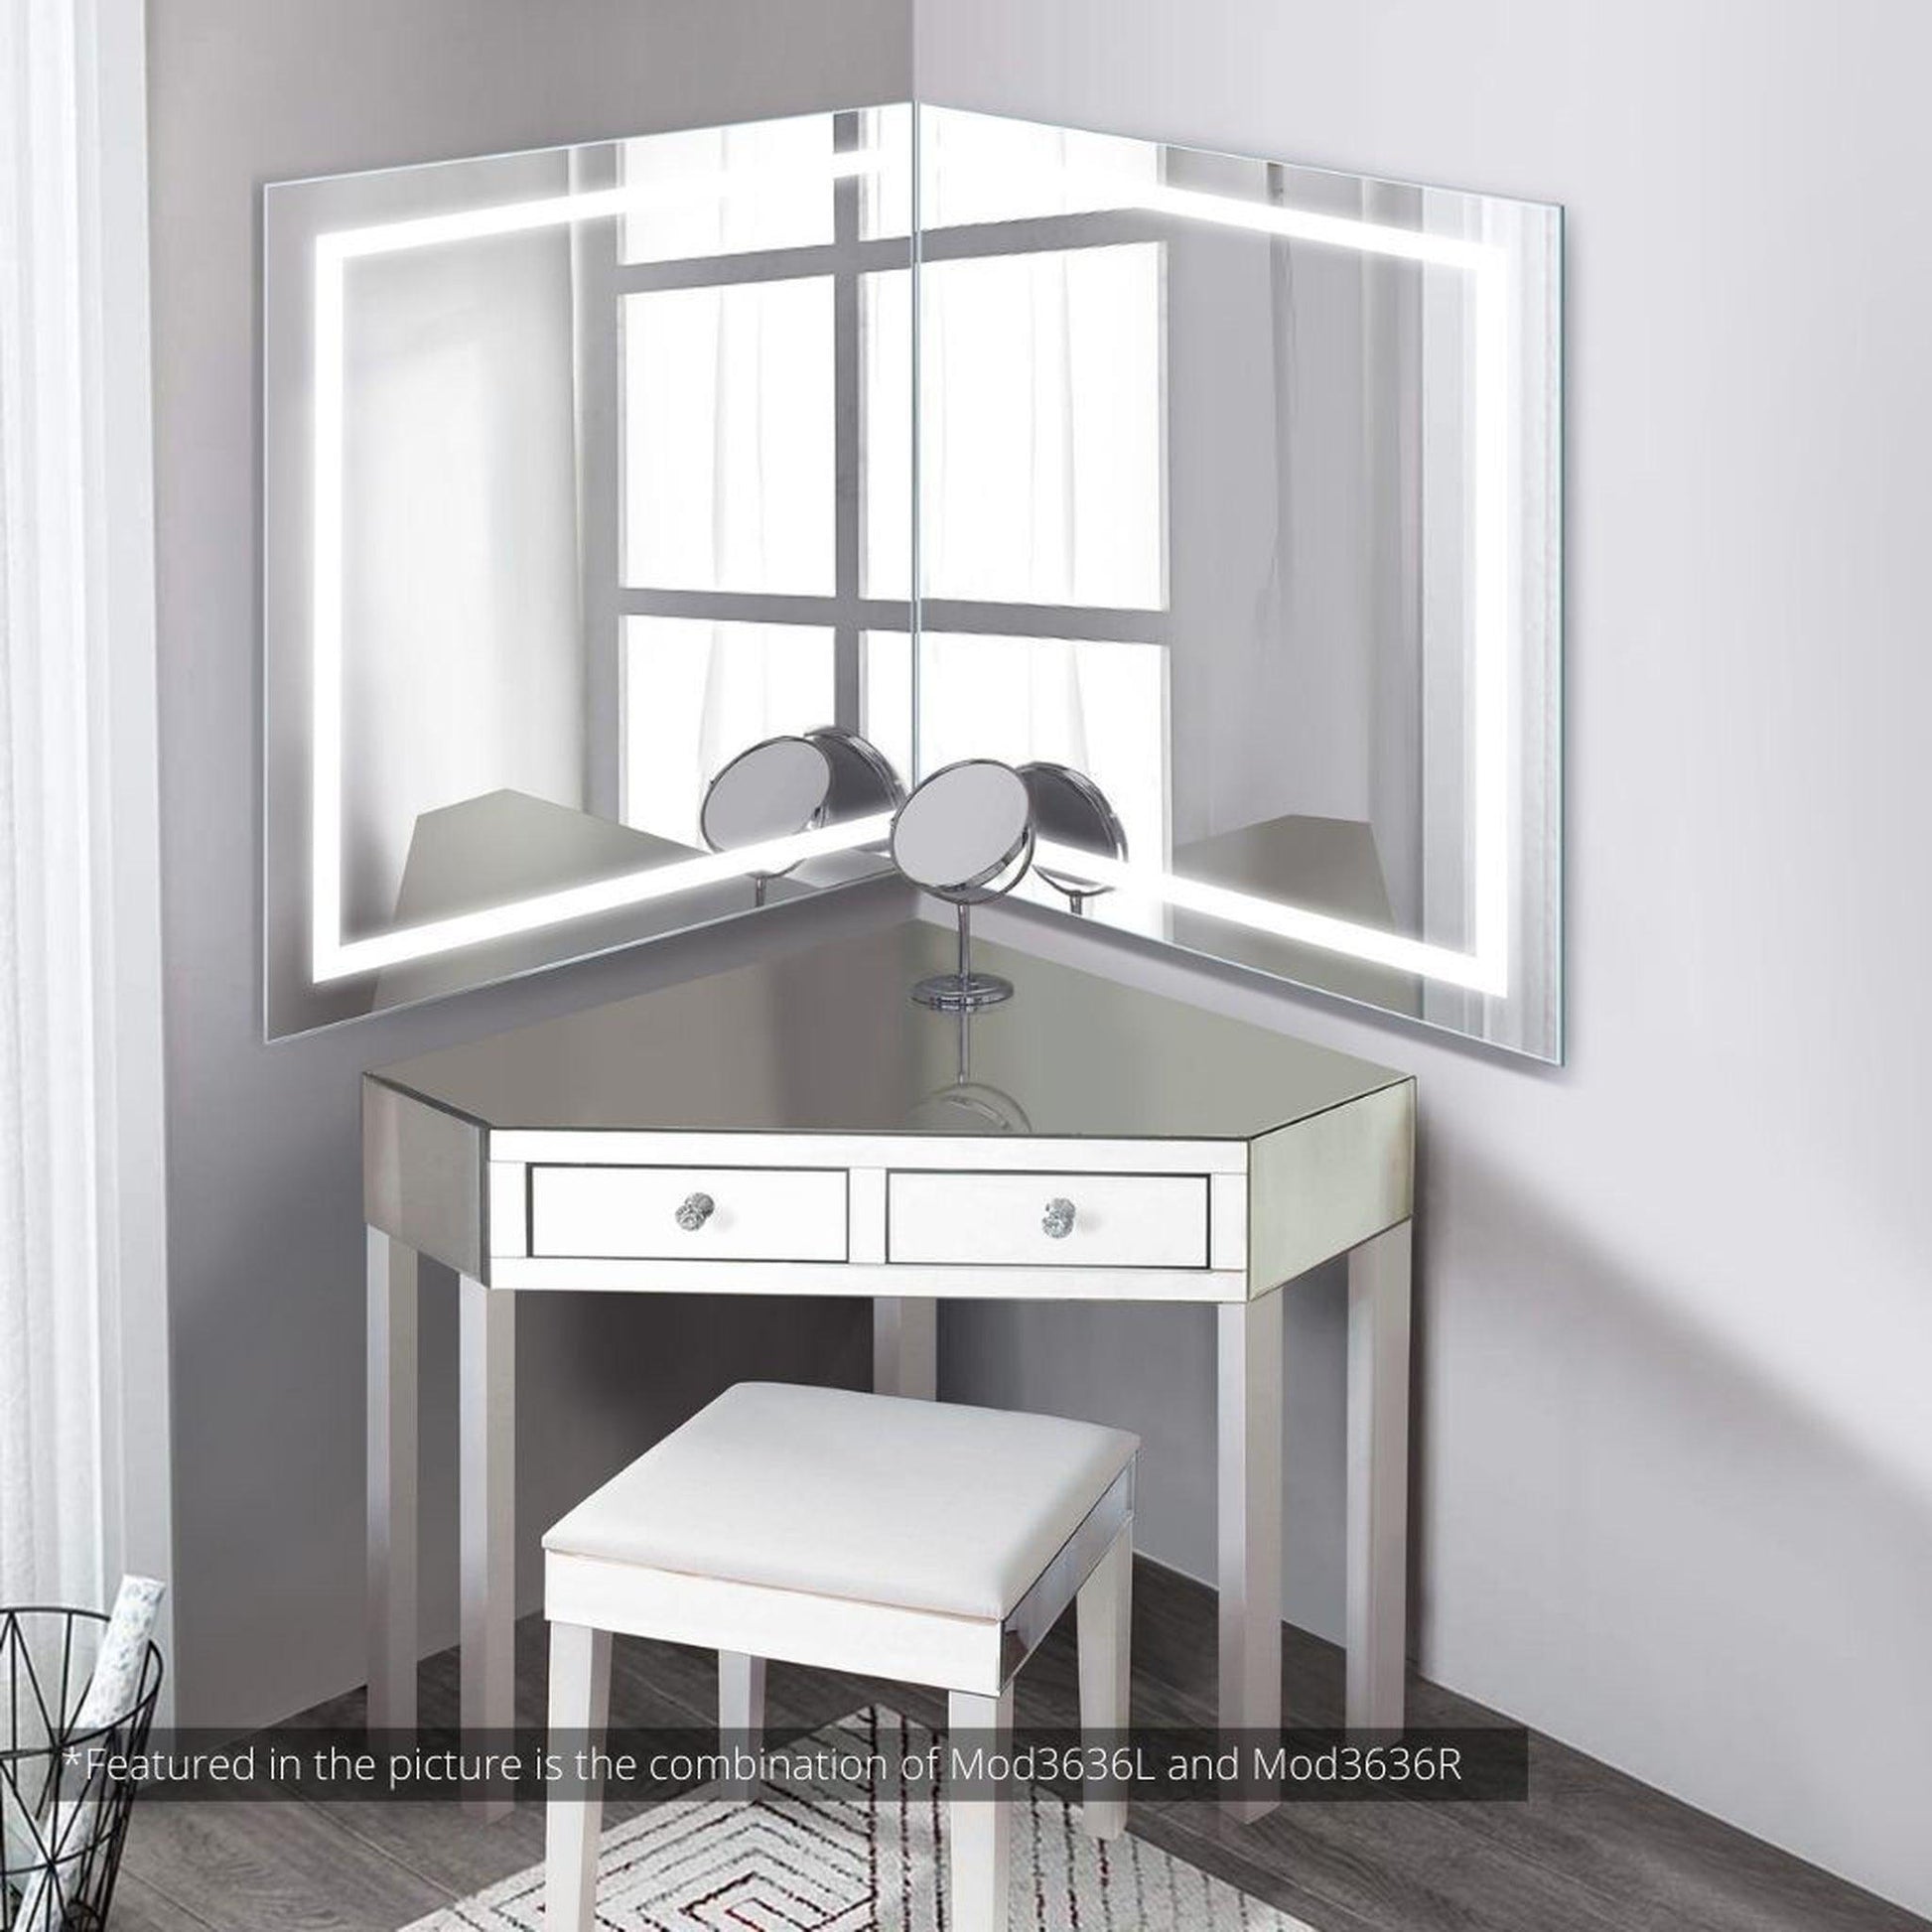 Krugg Reflections Mod 36" x 36" 5000K Square Left Configuration Wall-Mounted Silver-Backed LED Bathroom Vanity Mirror With Built-in Defogger and Dimmer